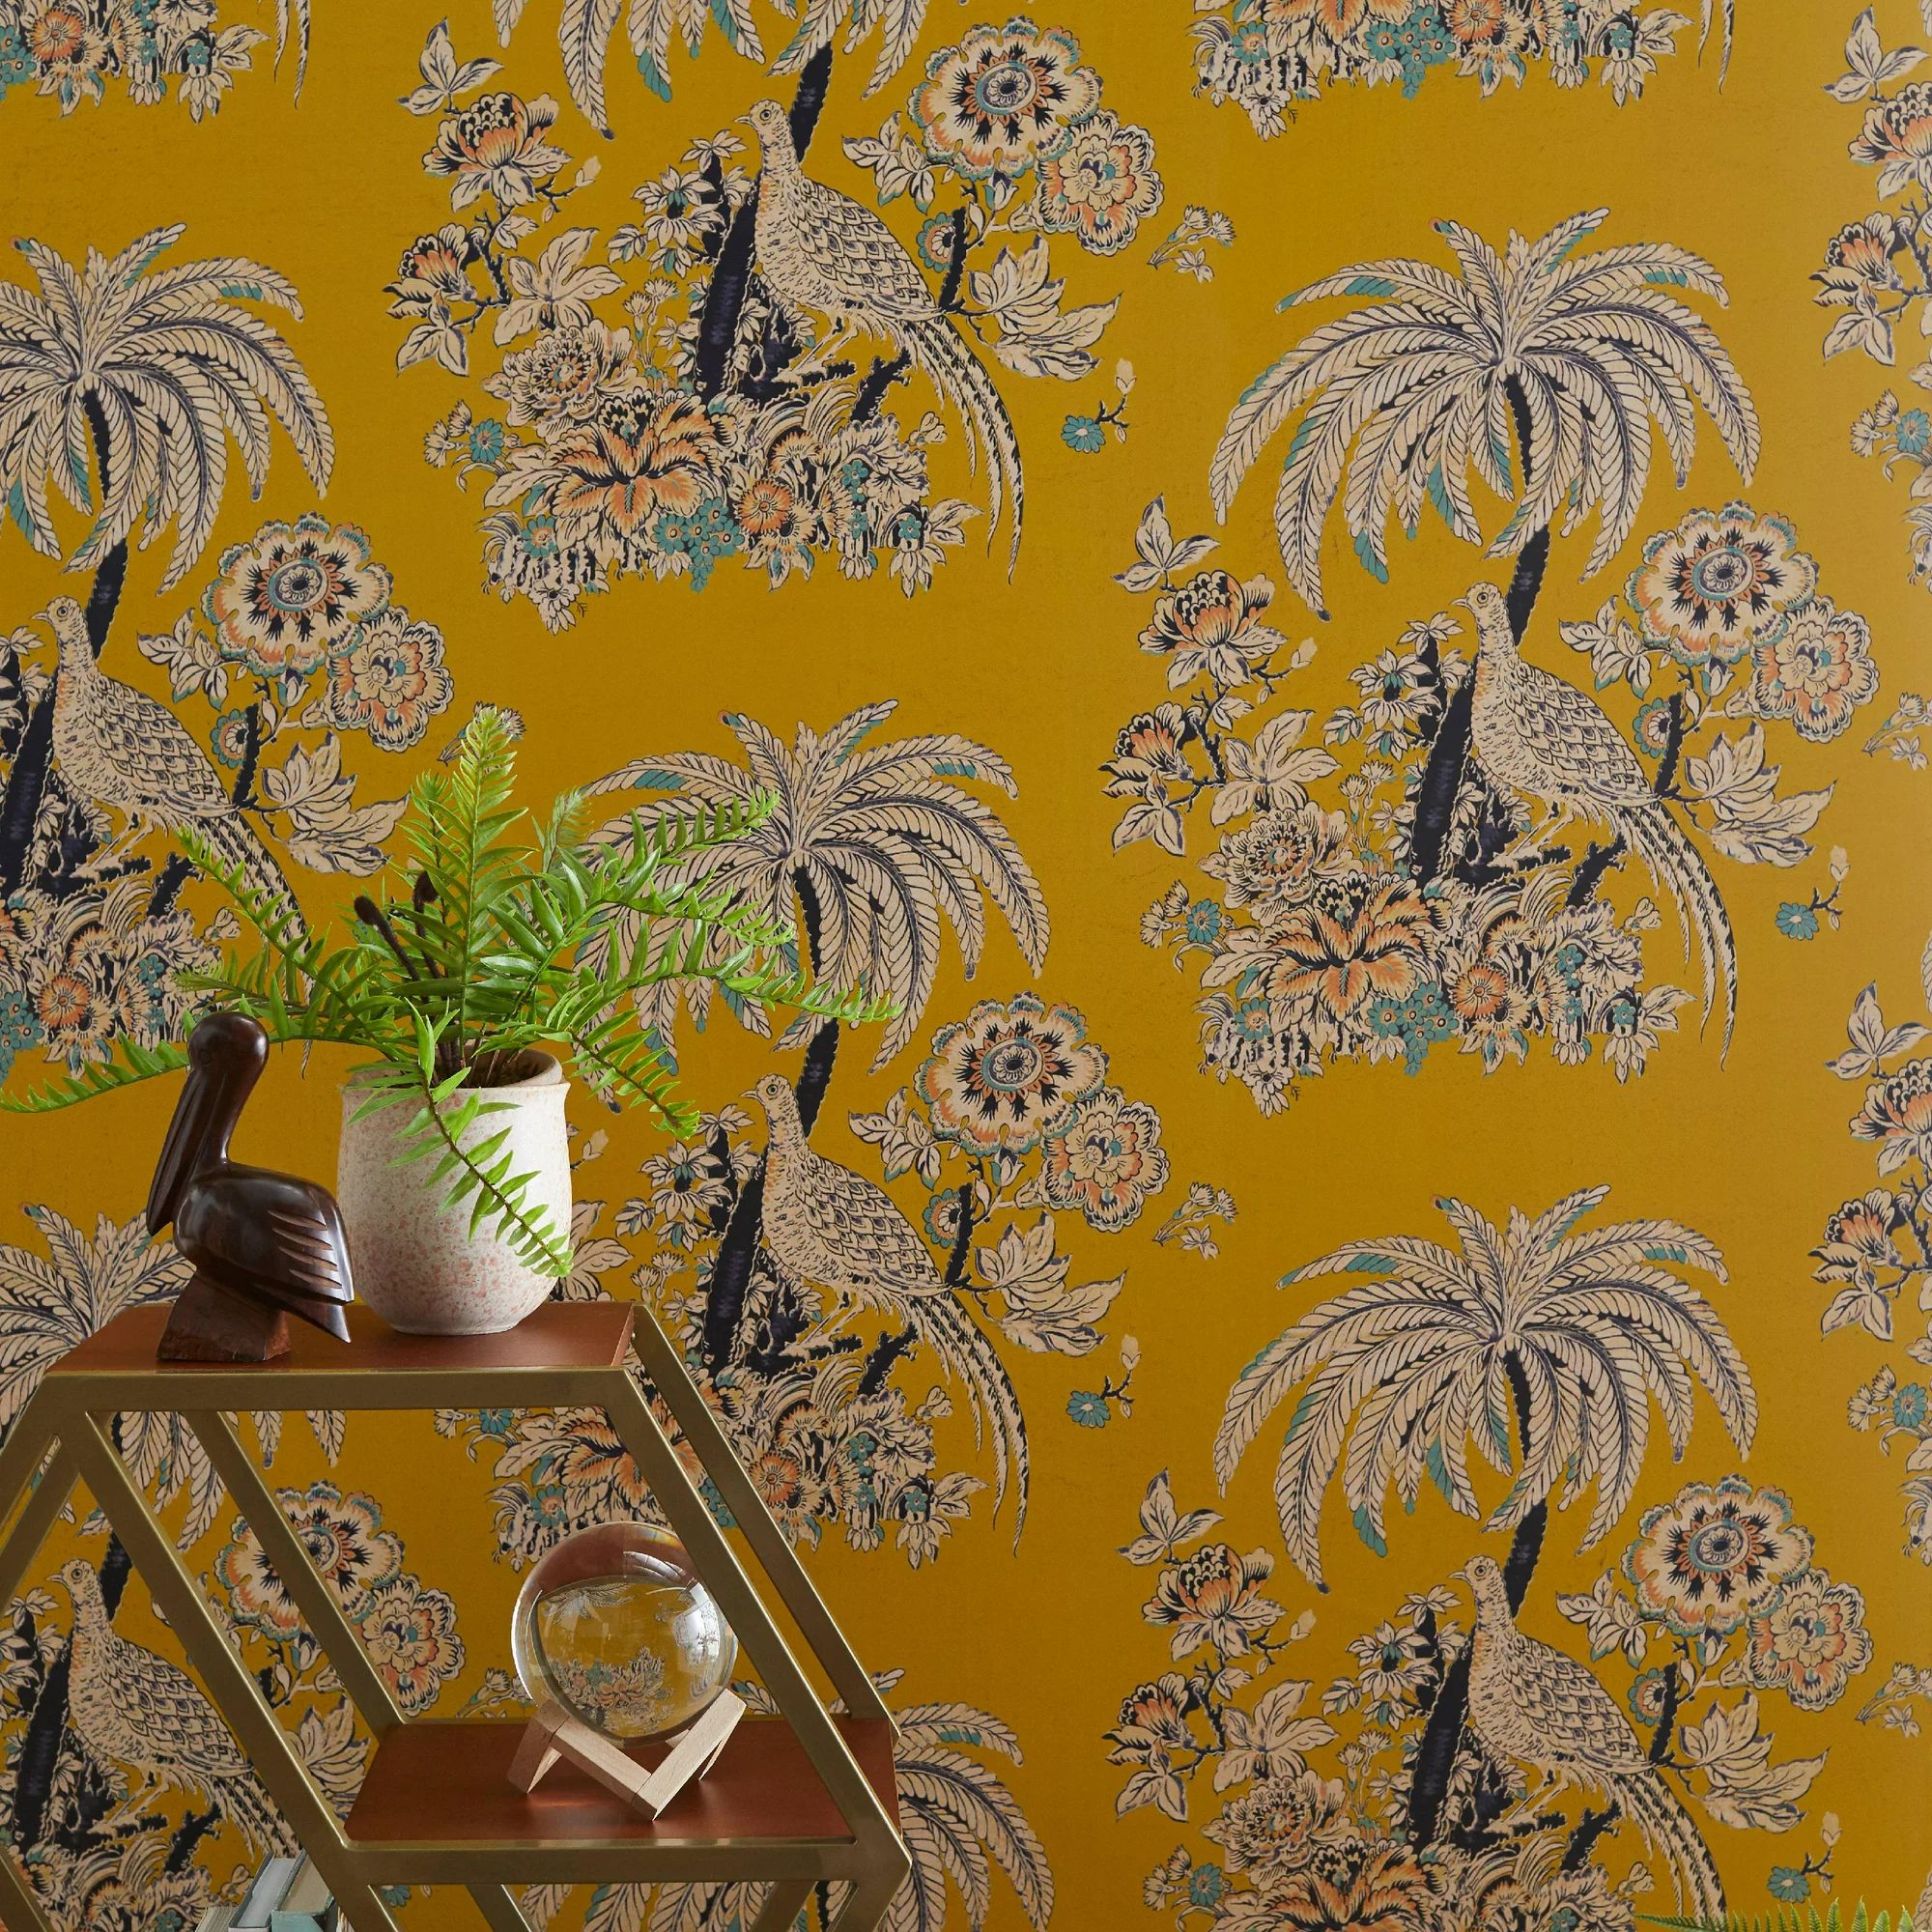 Tropical Toile Peel and Stick Wallpaper by Drew Barrymore Flower Home, Yellow | Walmart (US)